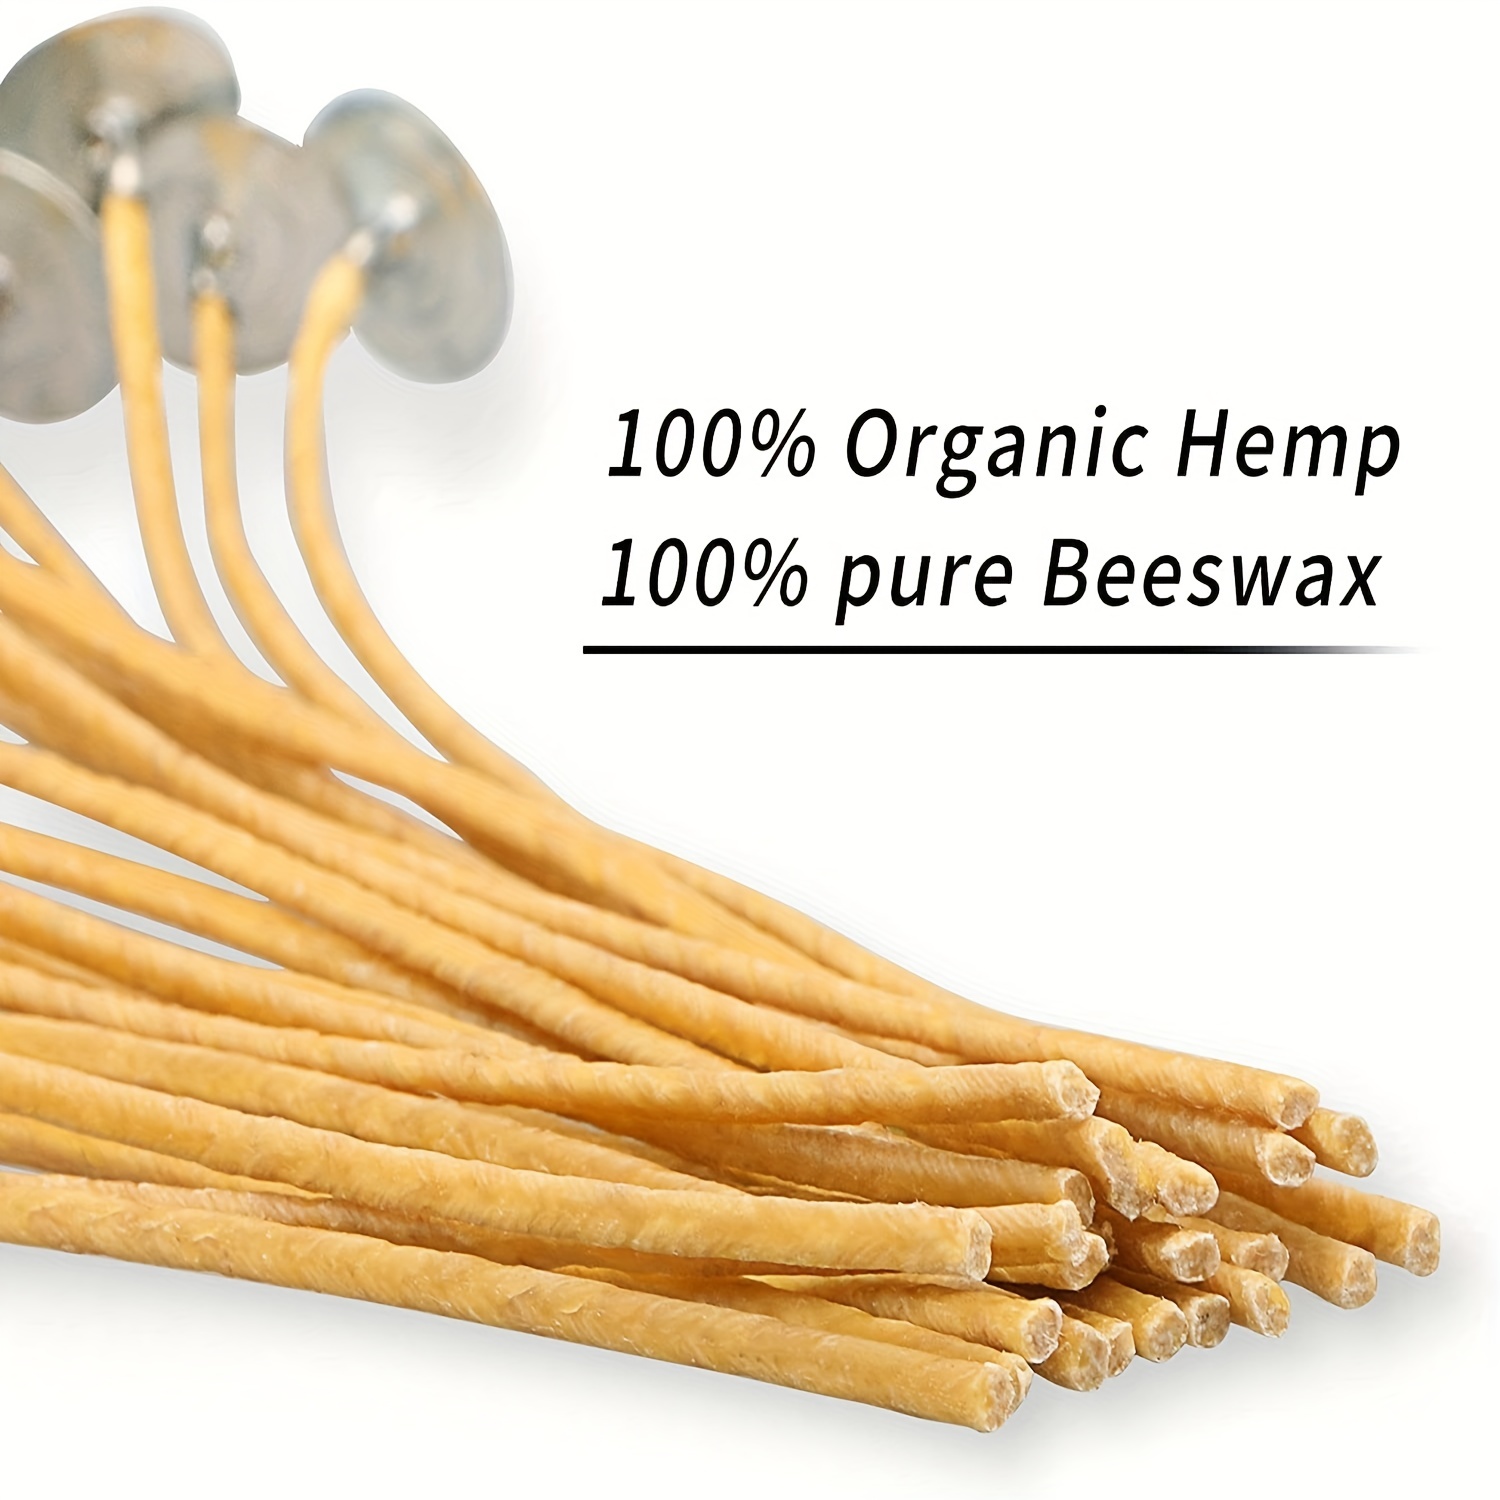 Hemp Candle Wicks 150 PCS 8 inch 2.5mm Beeswax Candle Wicks Thick